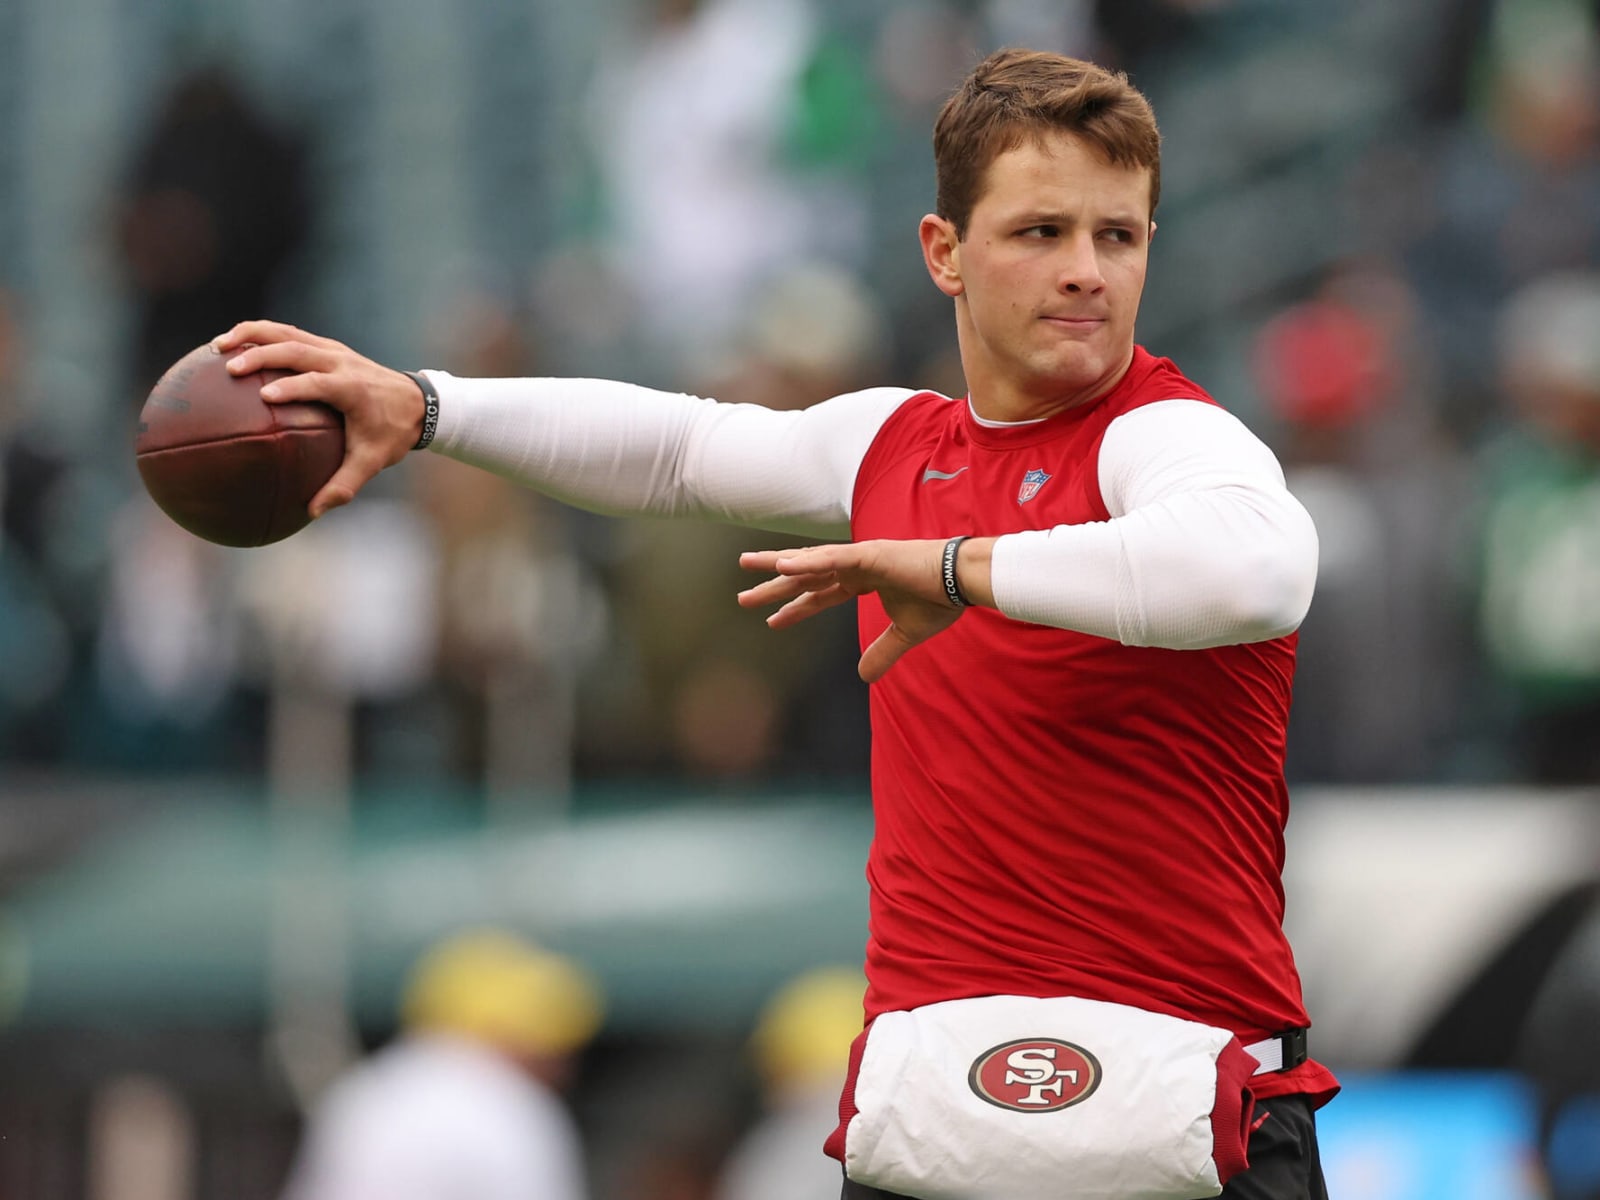 Will 49ers QB Brock Purdy have a sophomore slump in the 2023